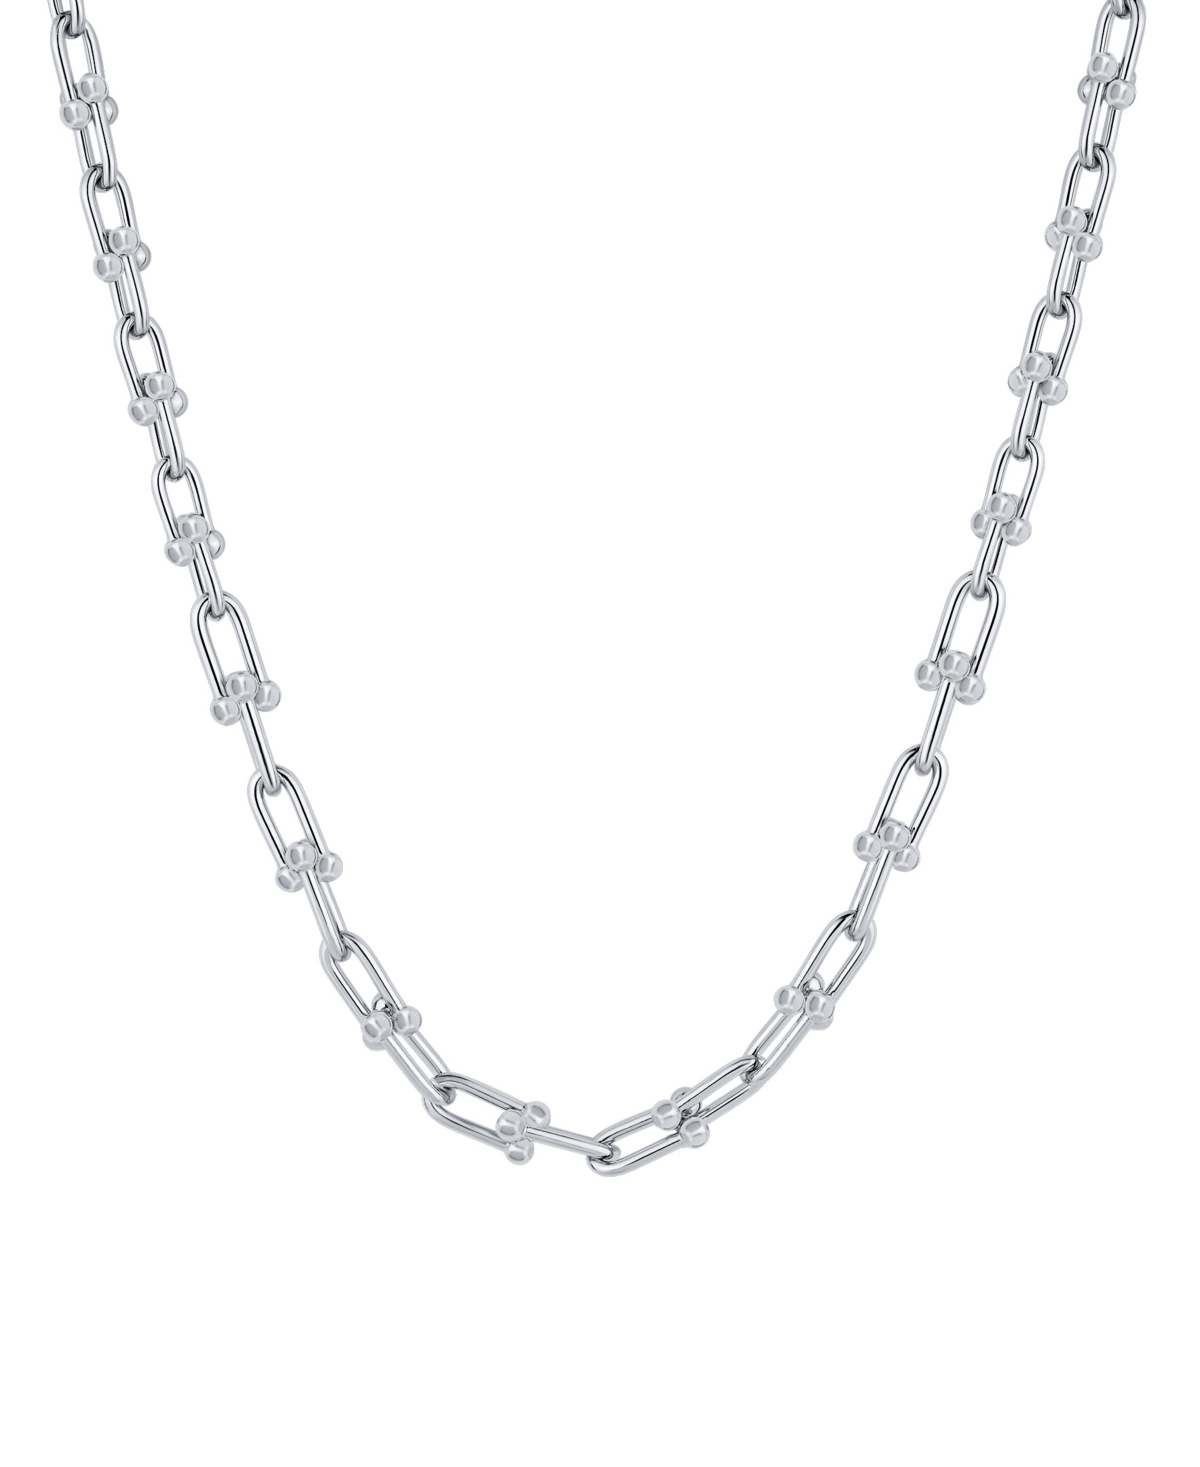 And Now This Fine Silver-plated Or 18k Gold-plated Graduated Chain Link Necklace